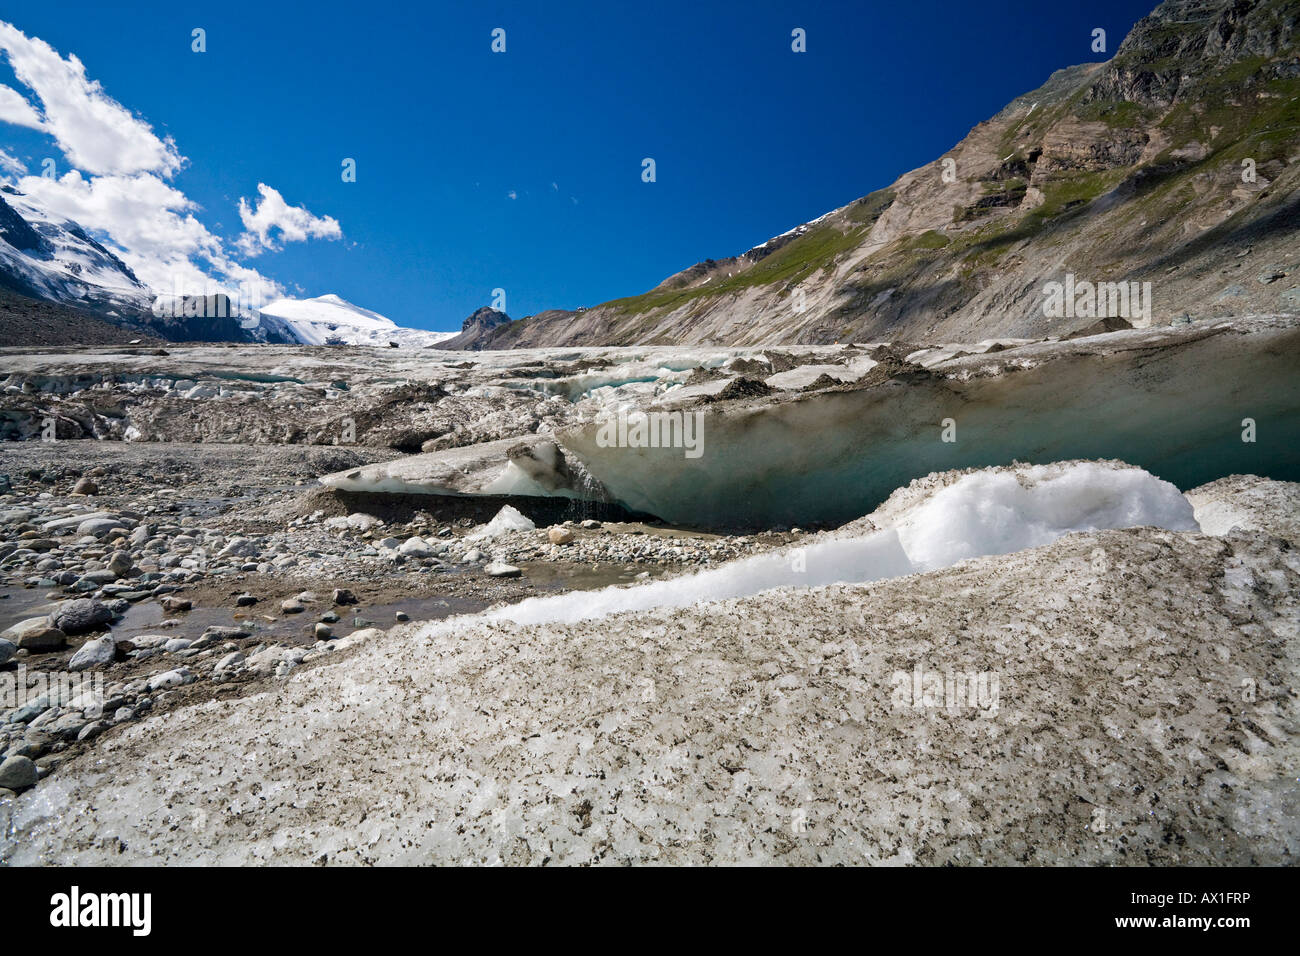 Grossglockner mountain group and glacier Pasterze, national park Hohe Tauern, Carinthia, Austria Stock Photo